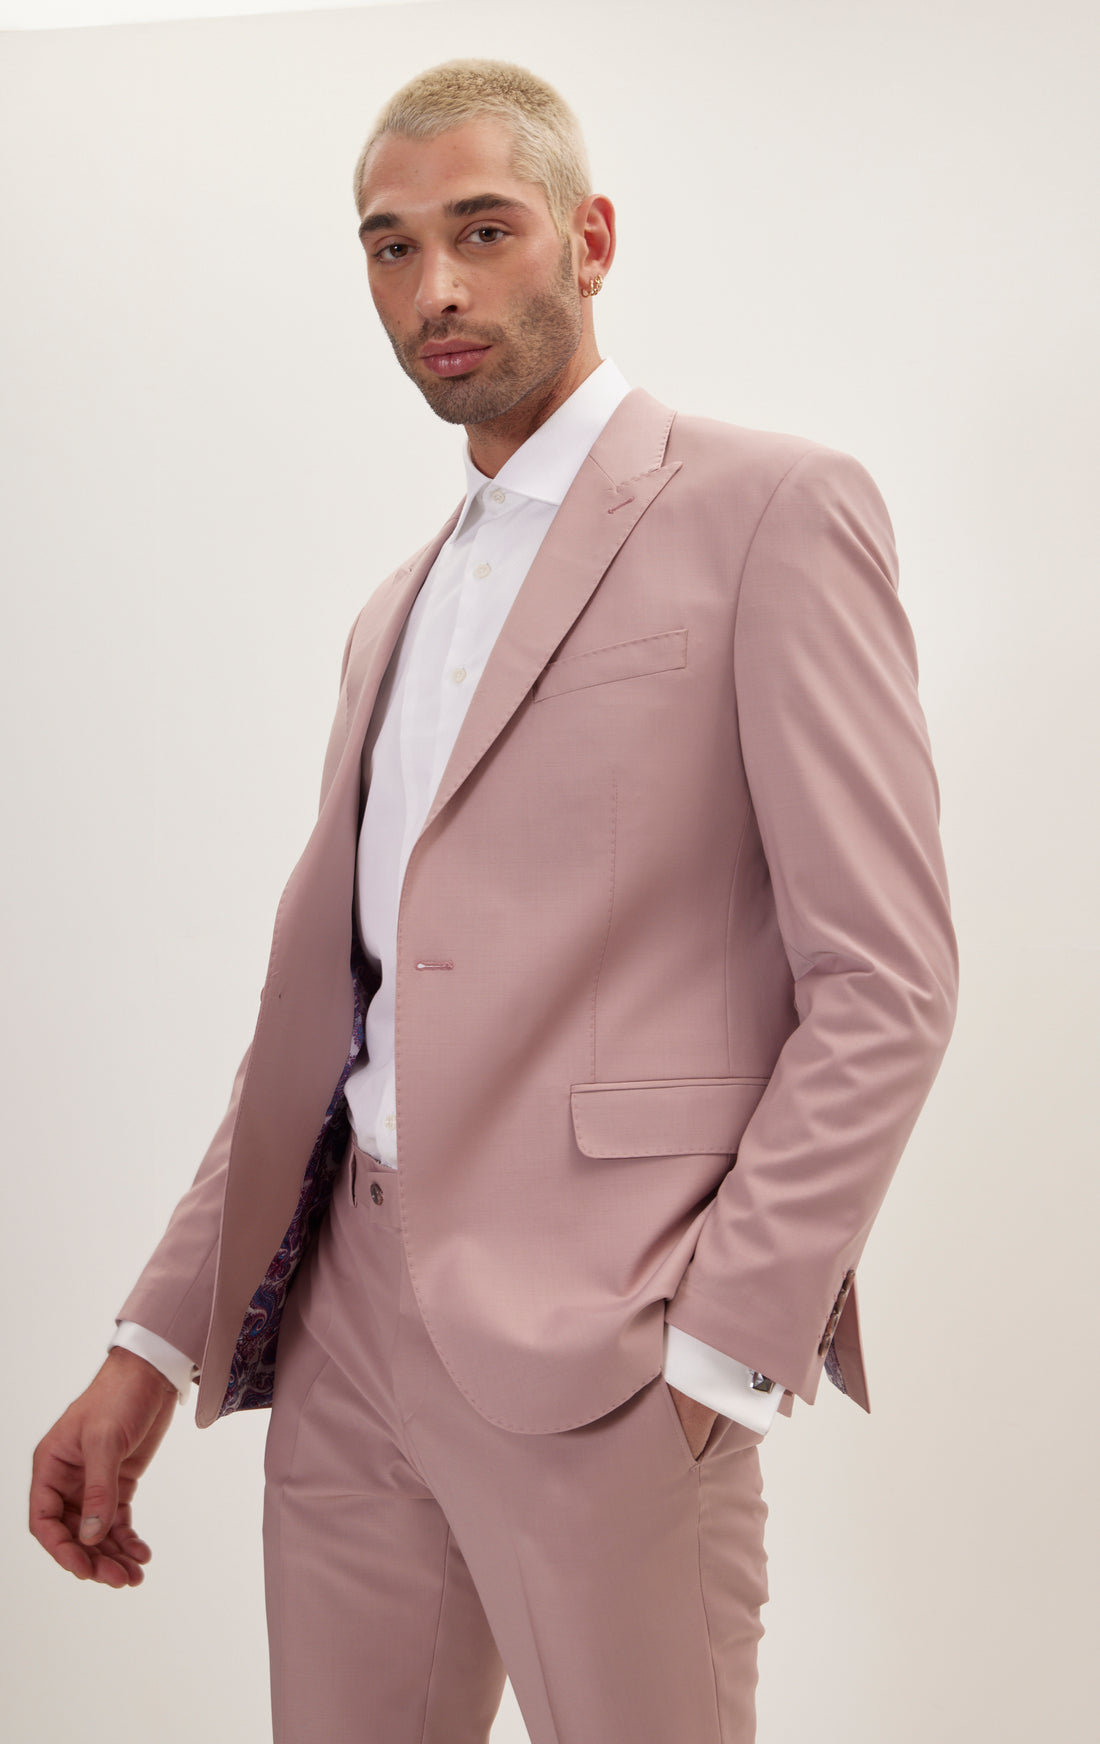 Super 120S Merino Wool Single Breasted Suit - Blush Pink